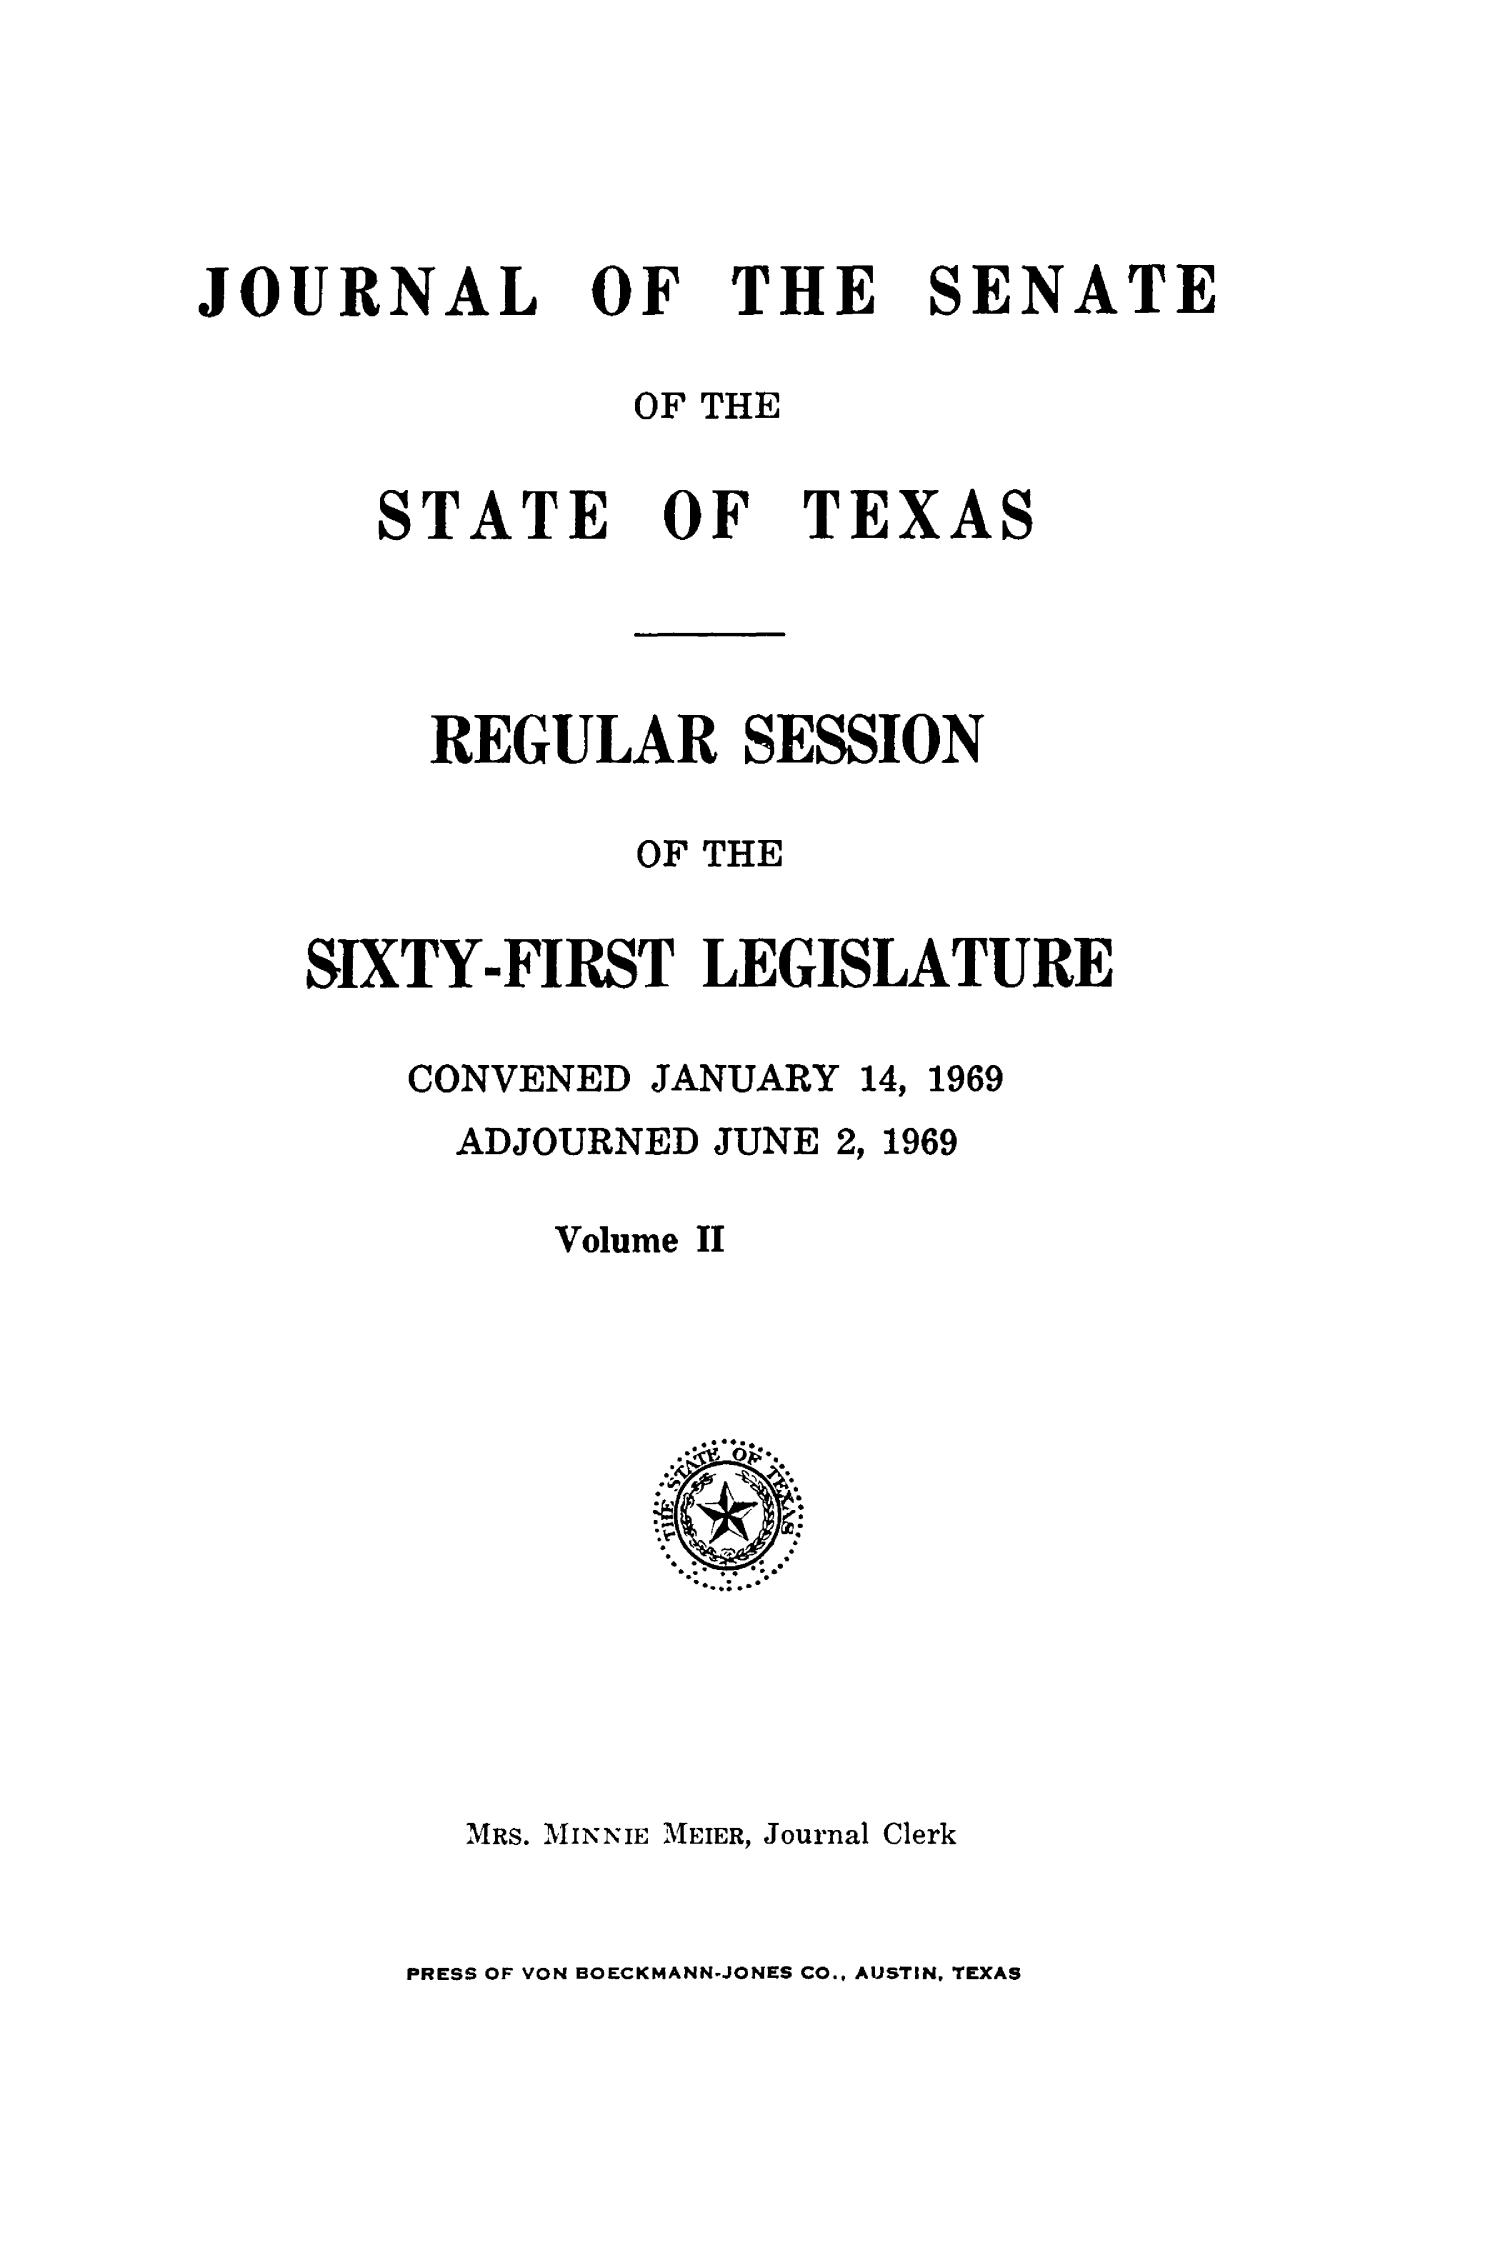 Journal of the Senate of the State of Texas, Regular Session of the Sixty-First Legislature, Volume 2
                                                
                                                    Title Page
                                                